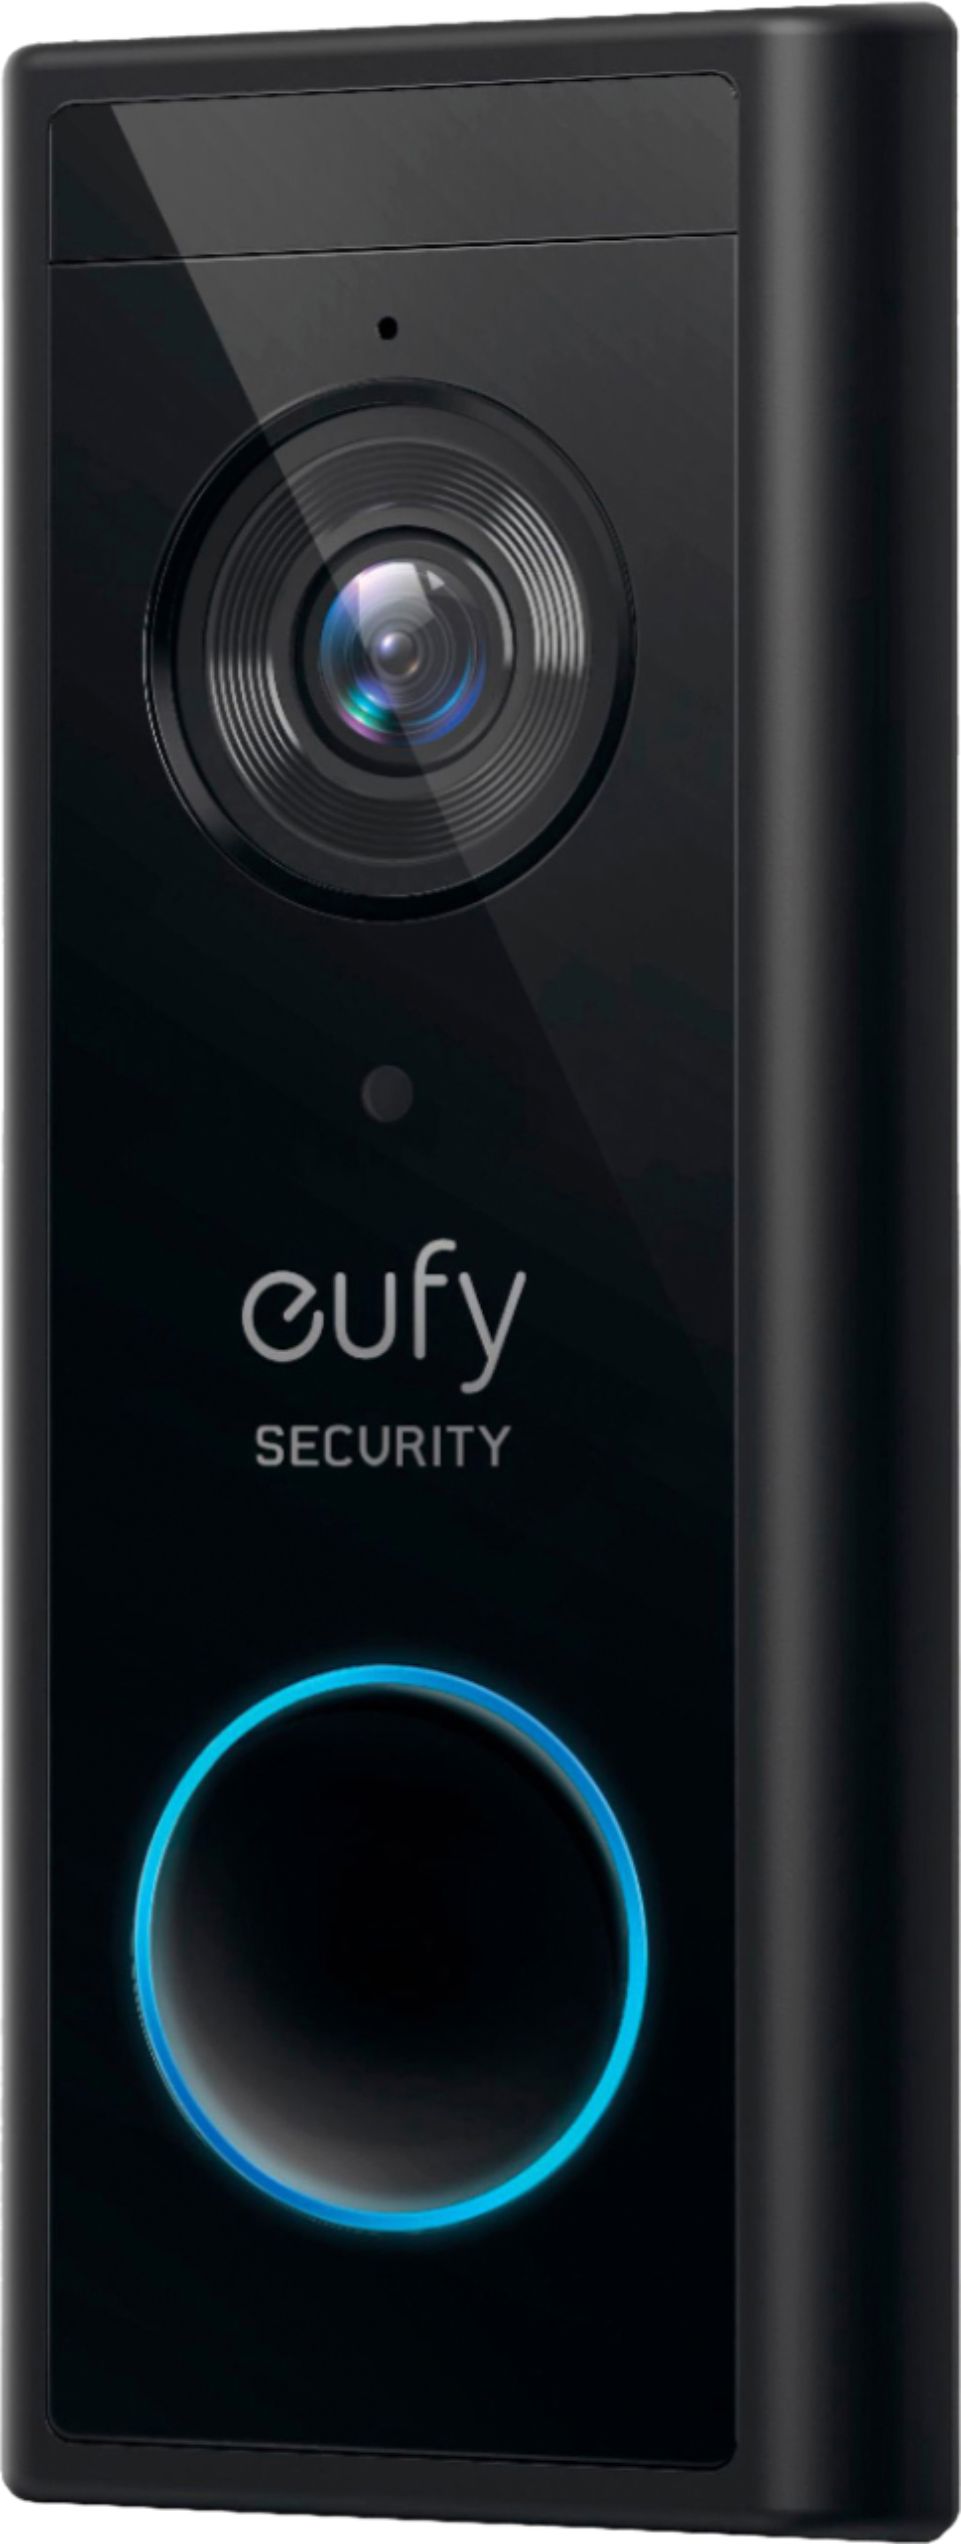 Wireless Video Doorbell No Monthly Battery-Powered eufy Security with 2K HD 